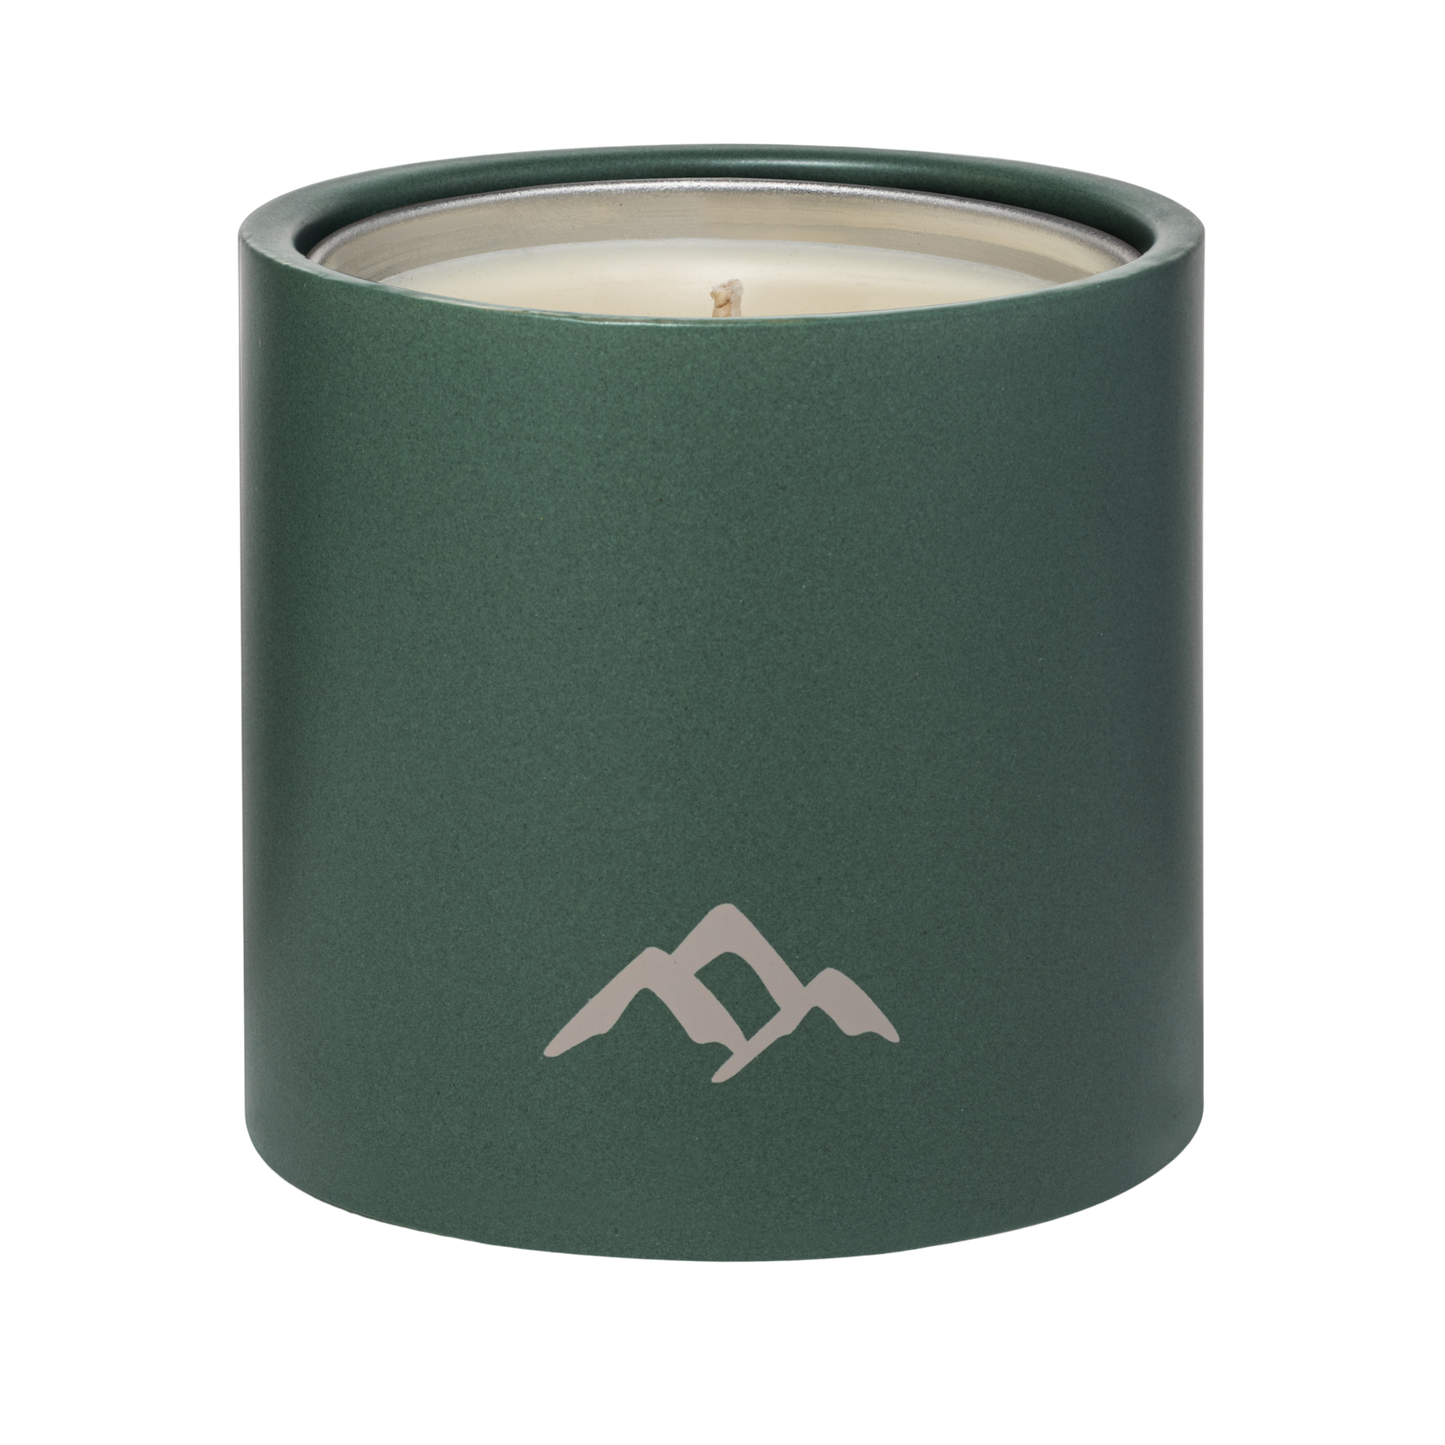 Refillable Mosquito Repellent Candle, Forest Green (9oz) - Case of 6